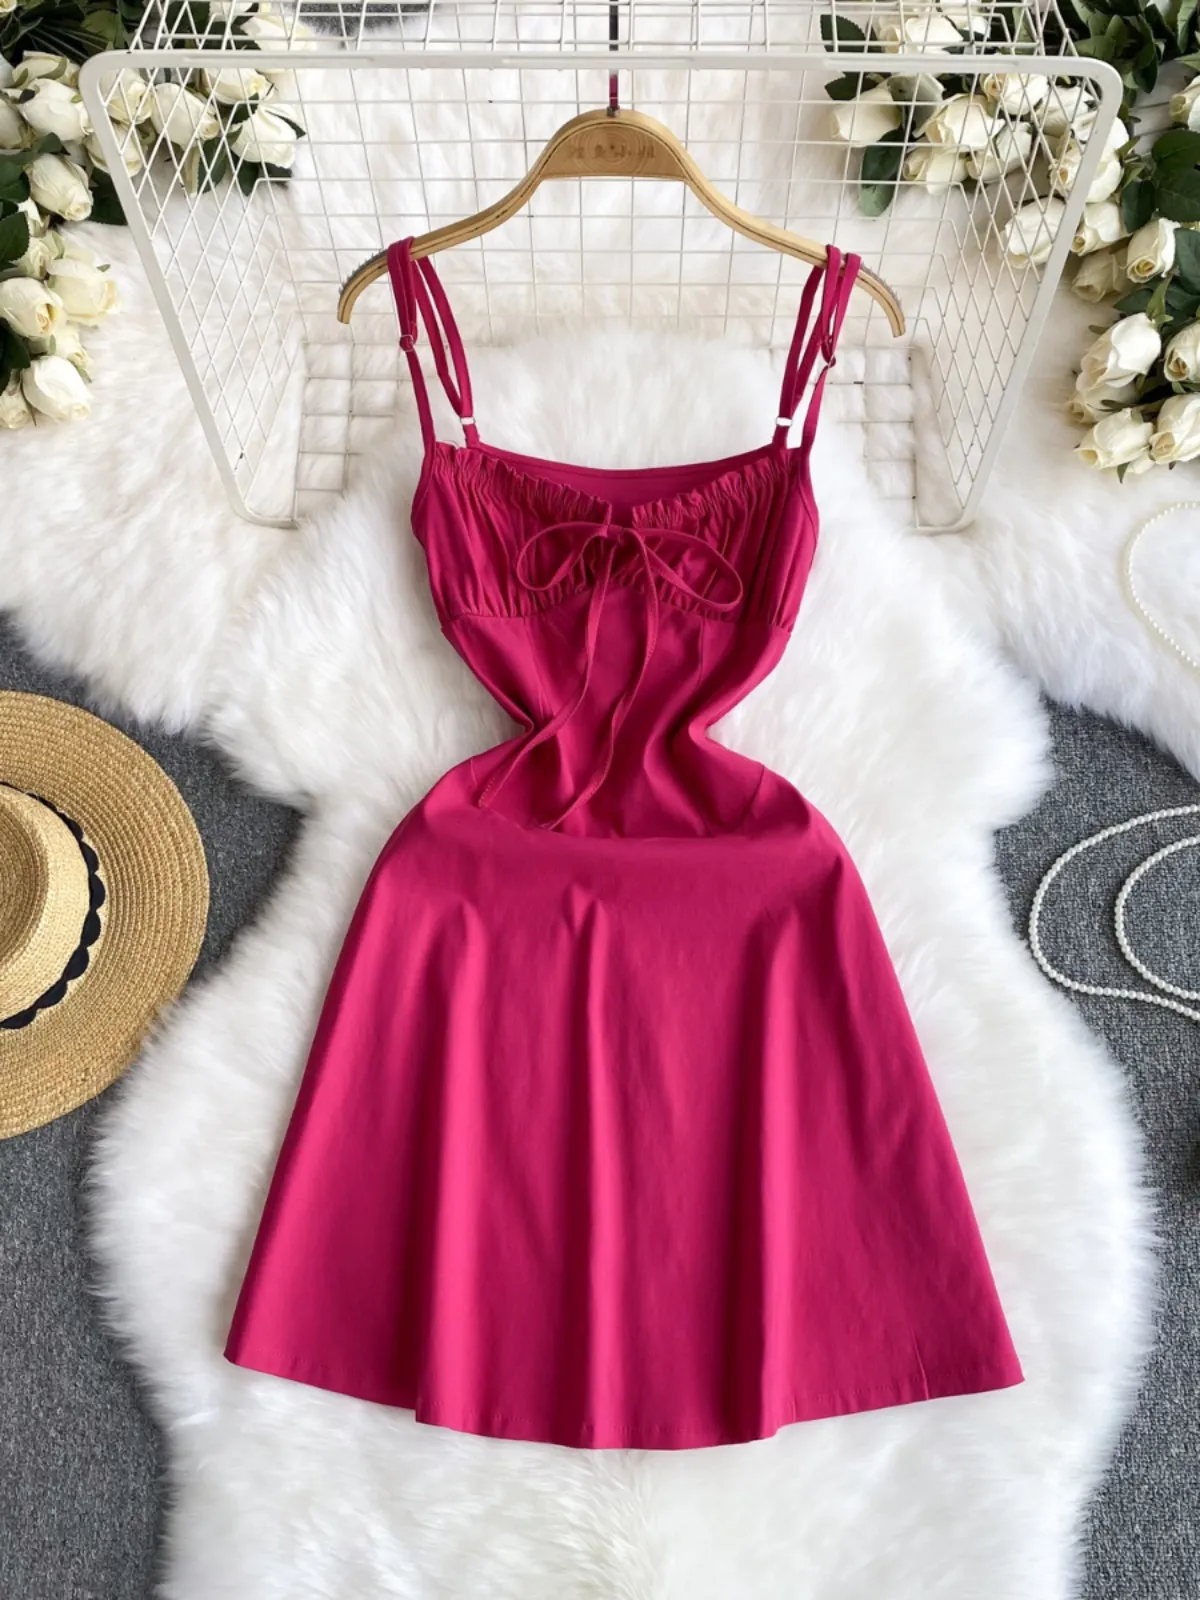 Pure desire spicy girl style camisole dress for women, summer strap pleated design, unique and slim waist style short skirt